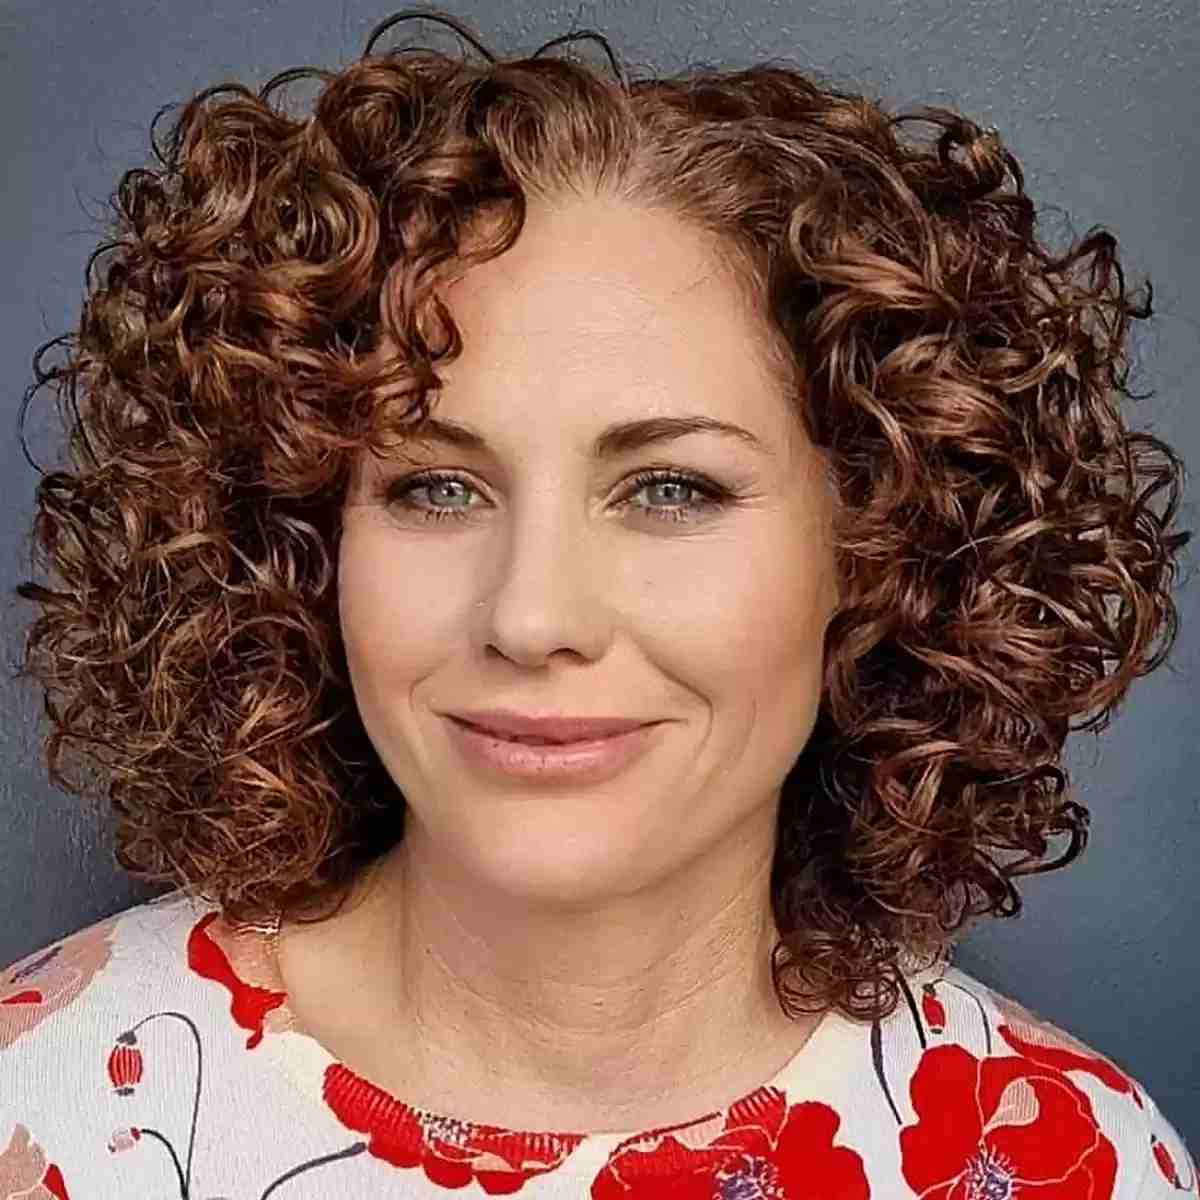 Collarbone-Length Ginger Brown Curls for Fall and Women over 40